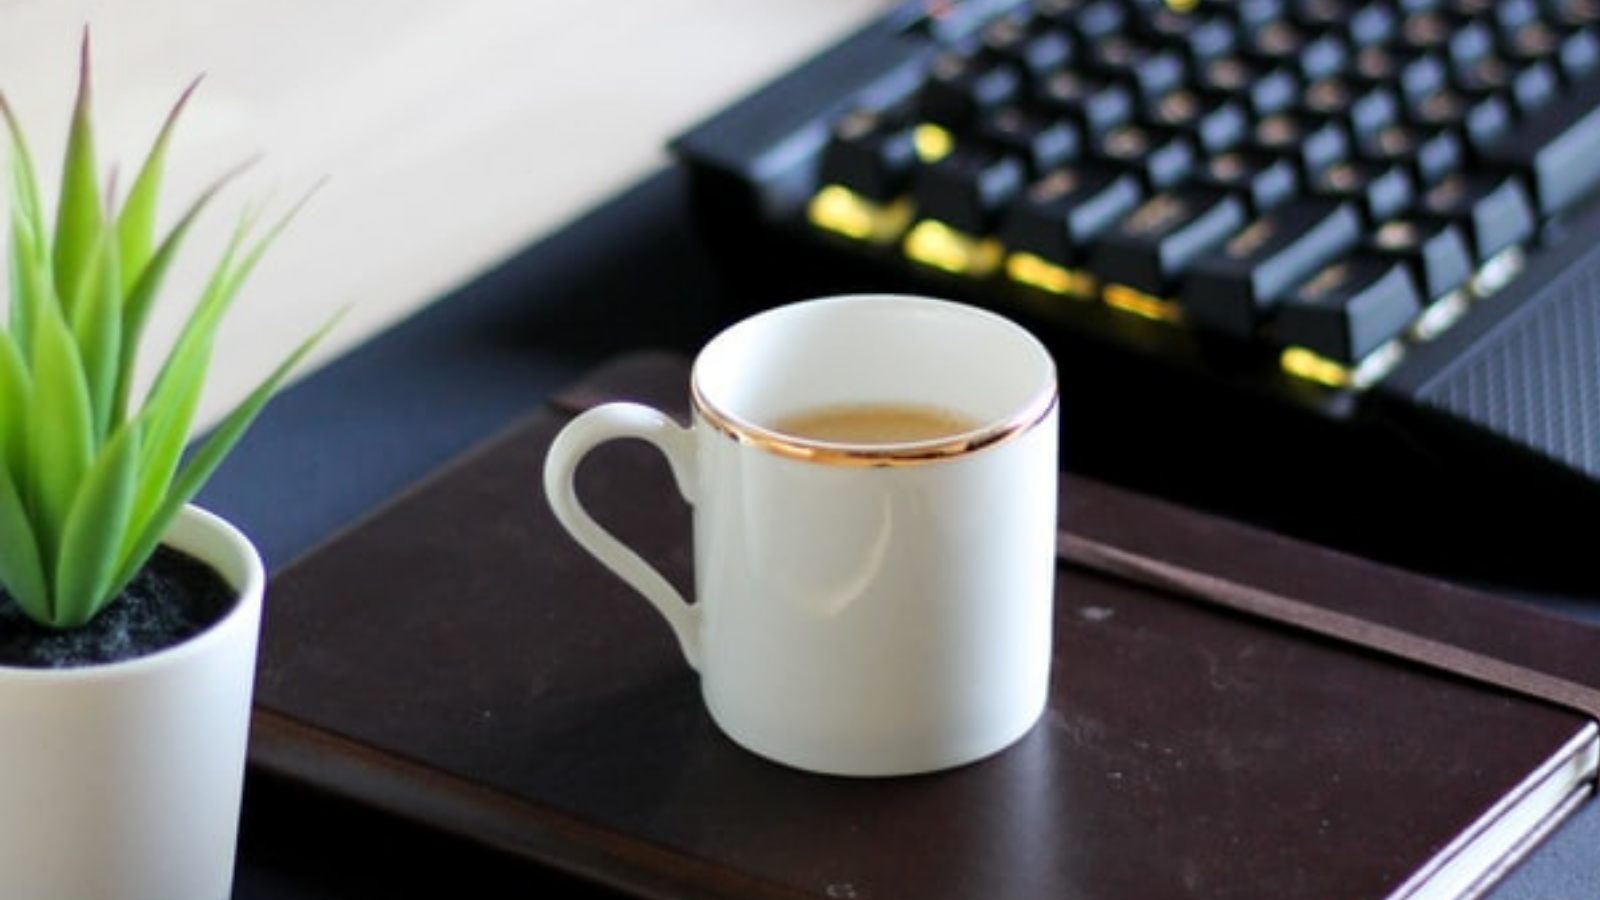 coffee cup next to a keyboard